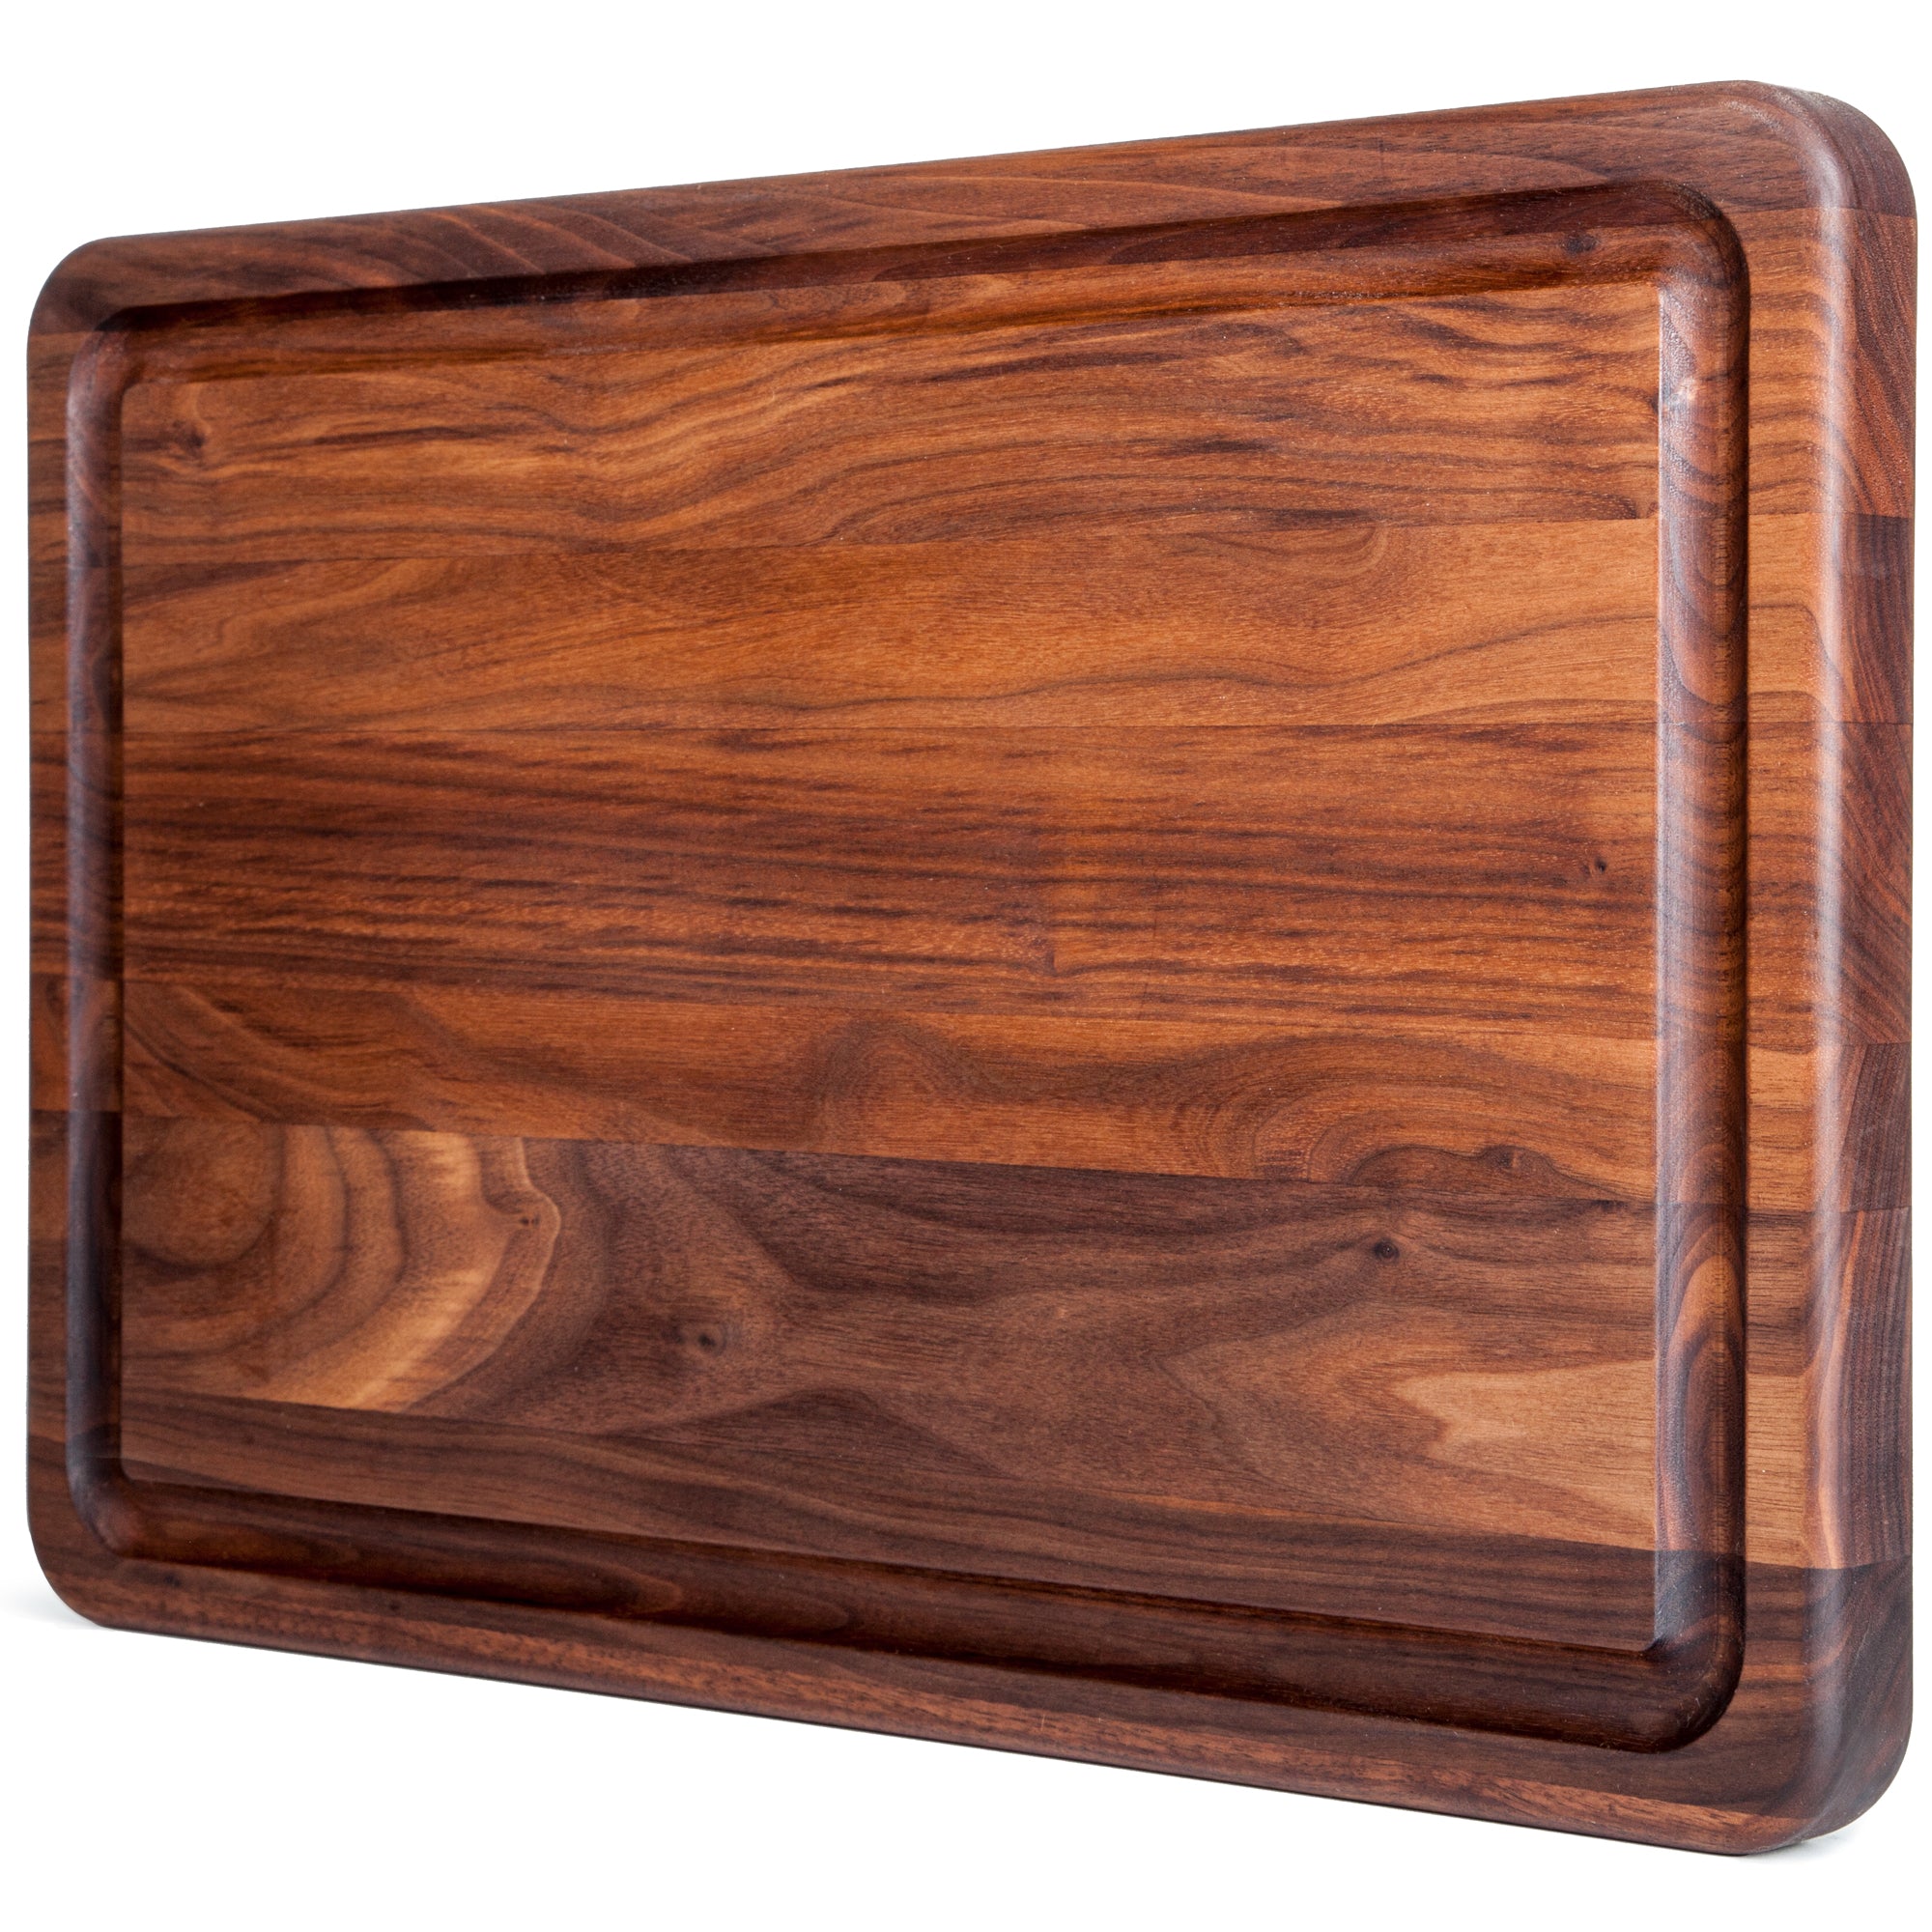 68422 by Broil King - WOOD FIBRE CUTTING BOARD